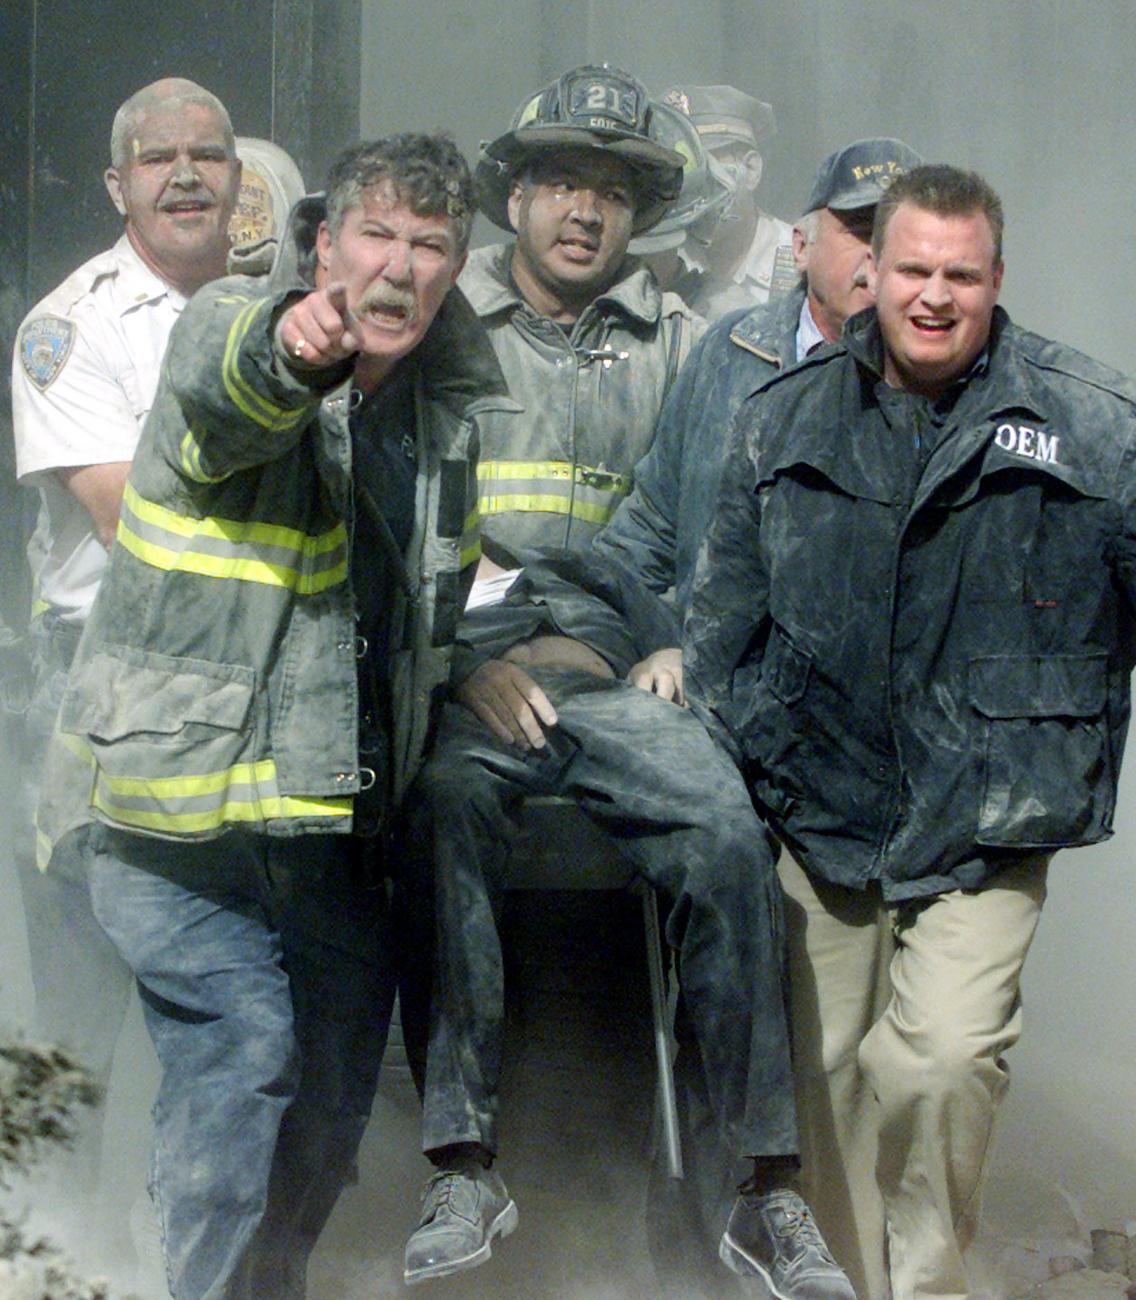 Rescue workers carry the body of FDNY Chaplain Mychal Judge after he was killed in the collapse of the South Tower at the World Trade Center in New York September 11, 2001